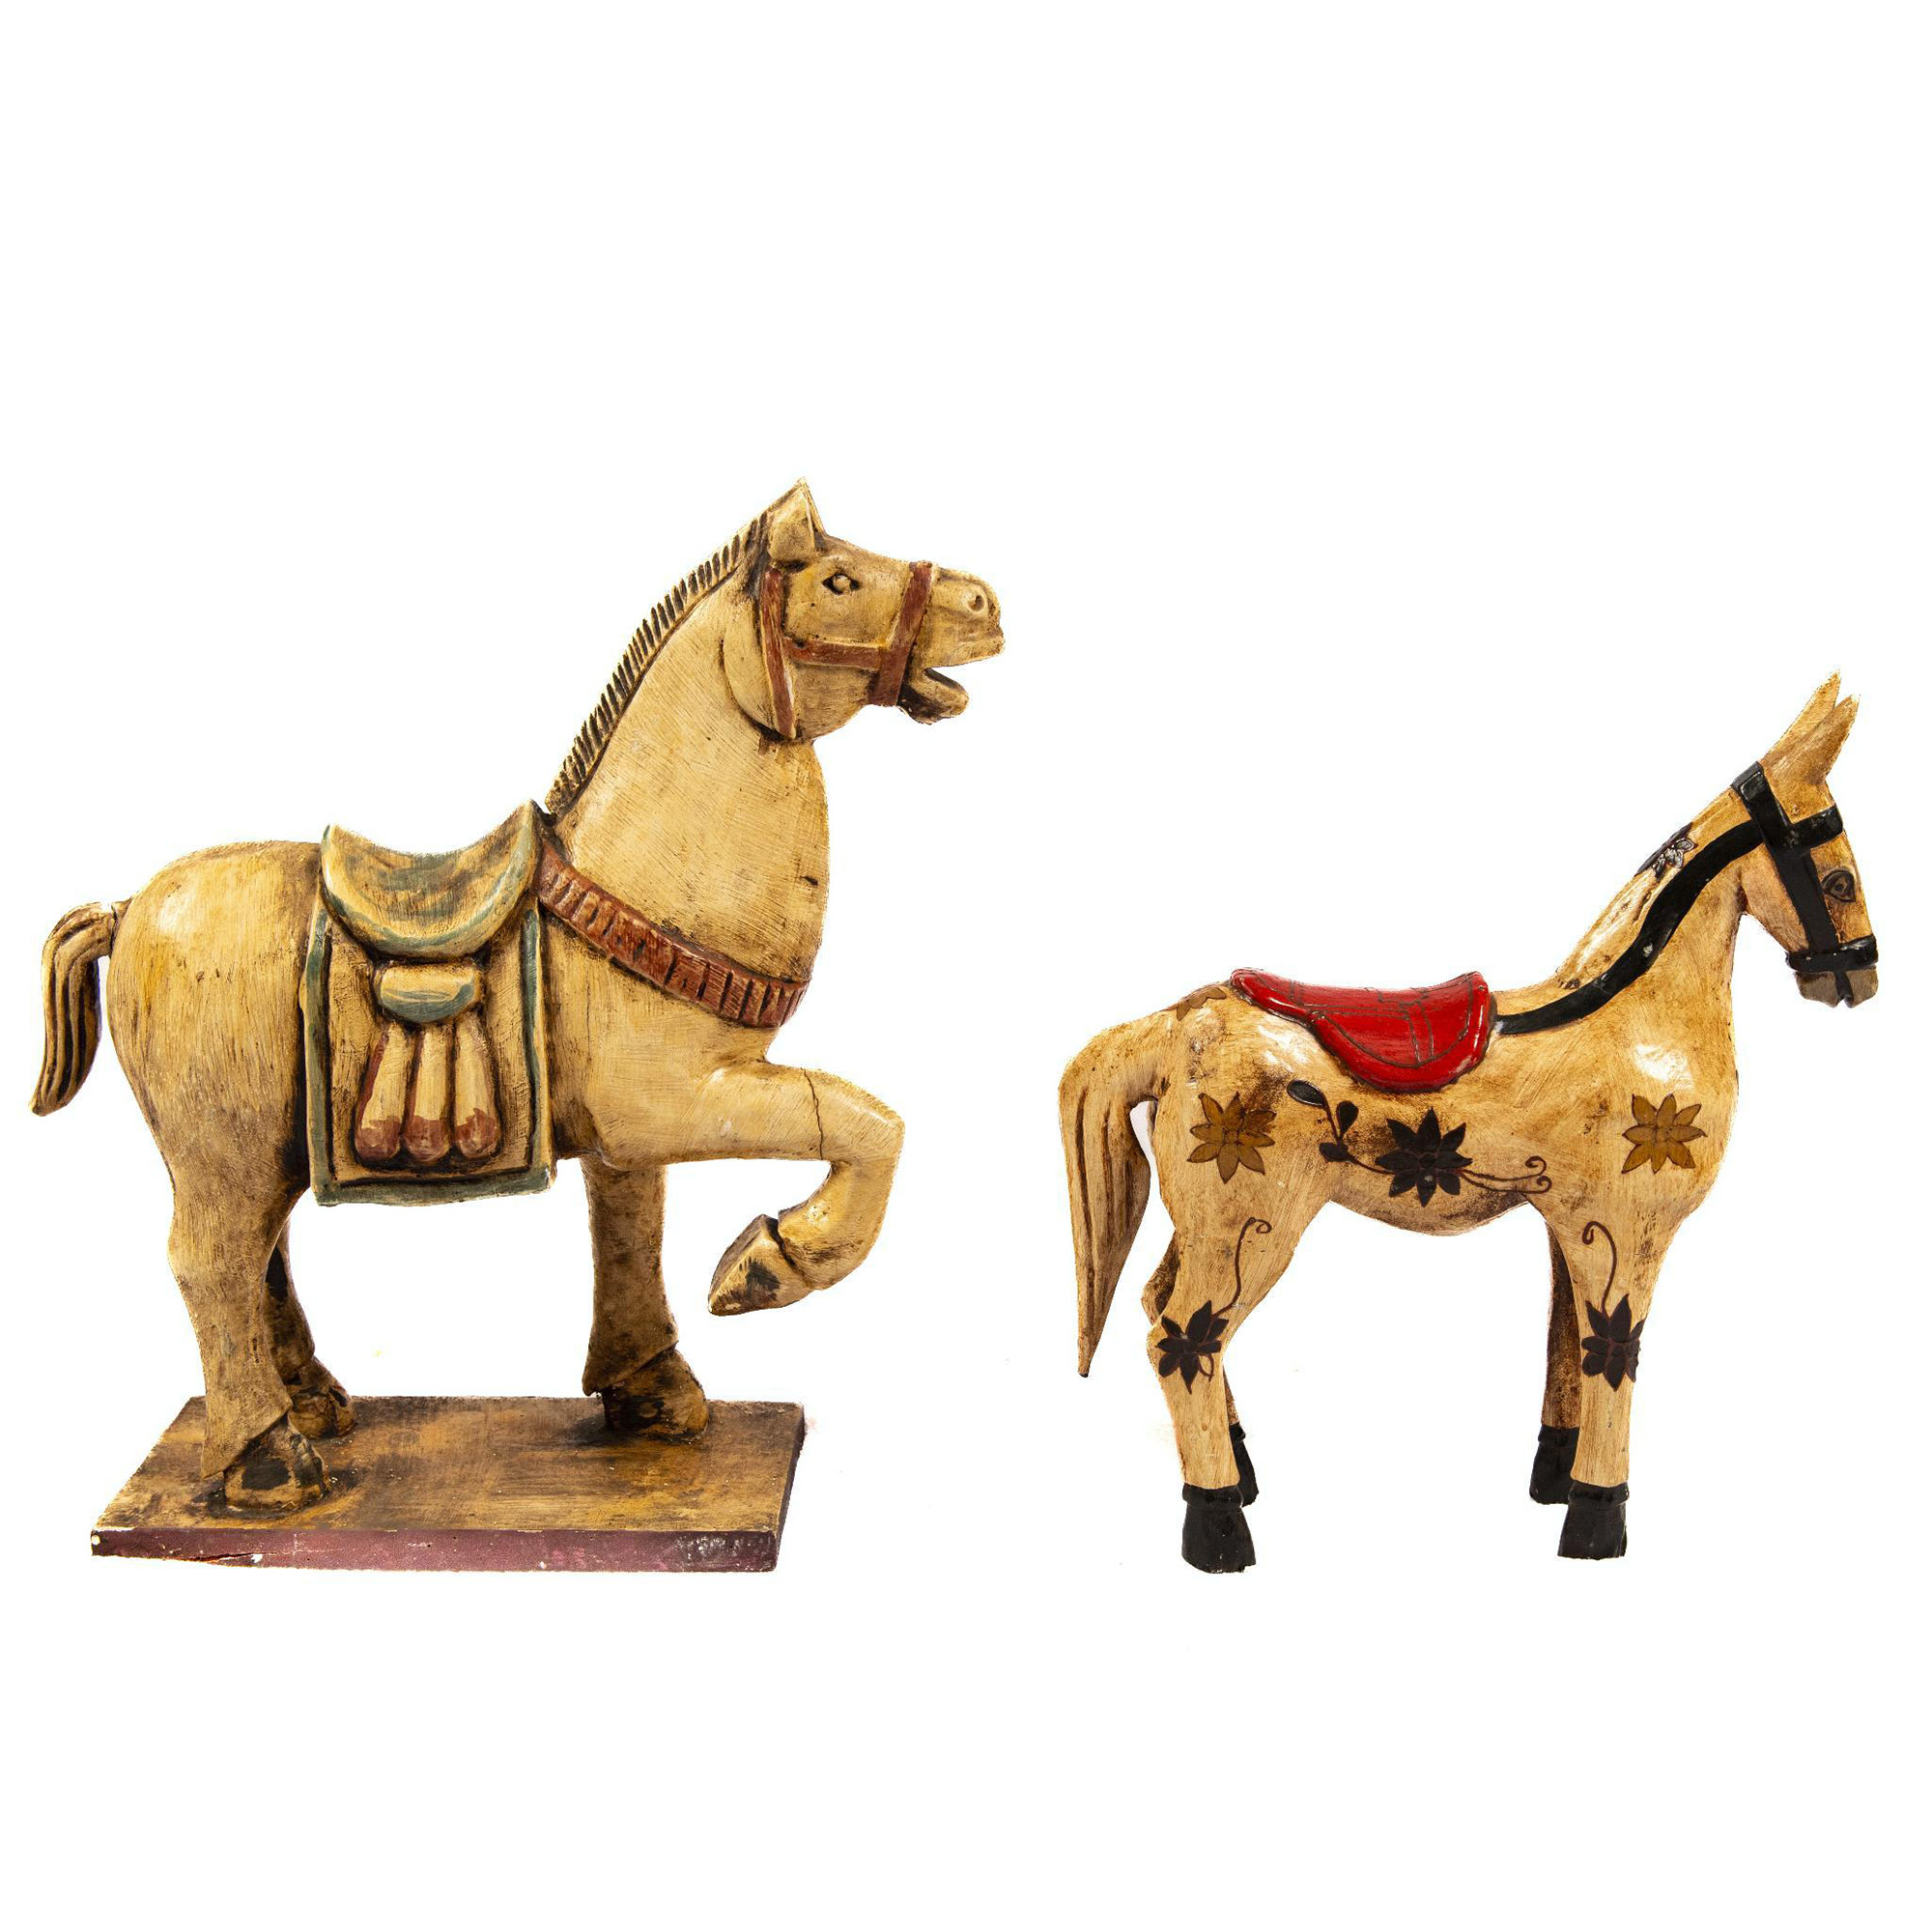 Pair of Decorative Painted Wooden Horses - Image 3 of 5